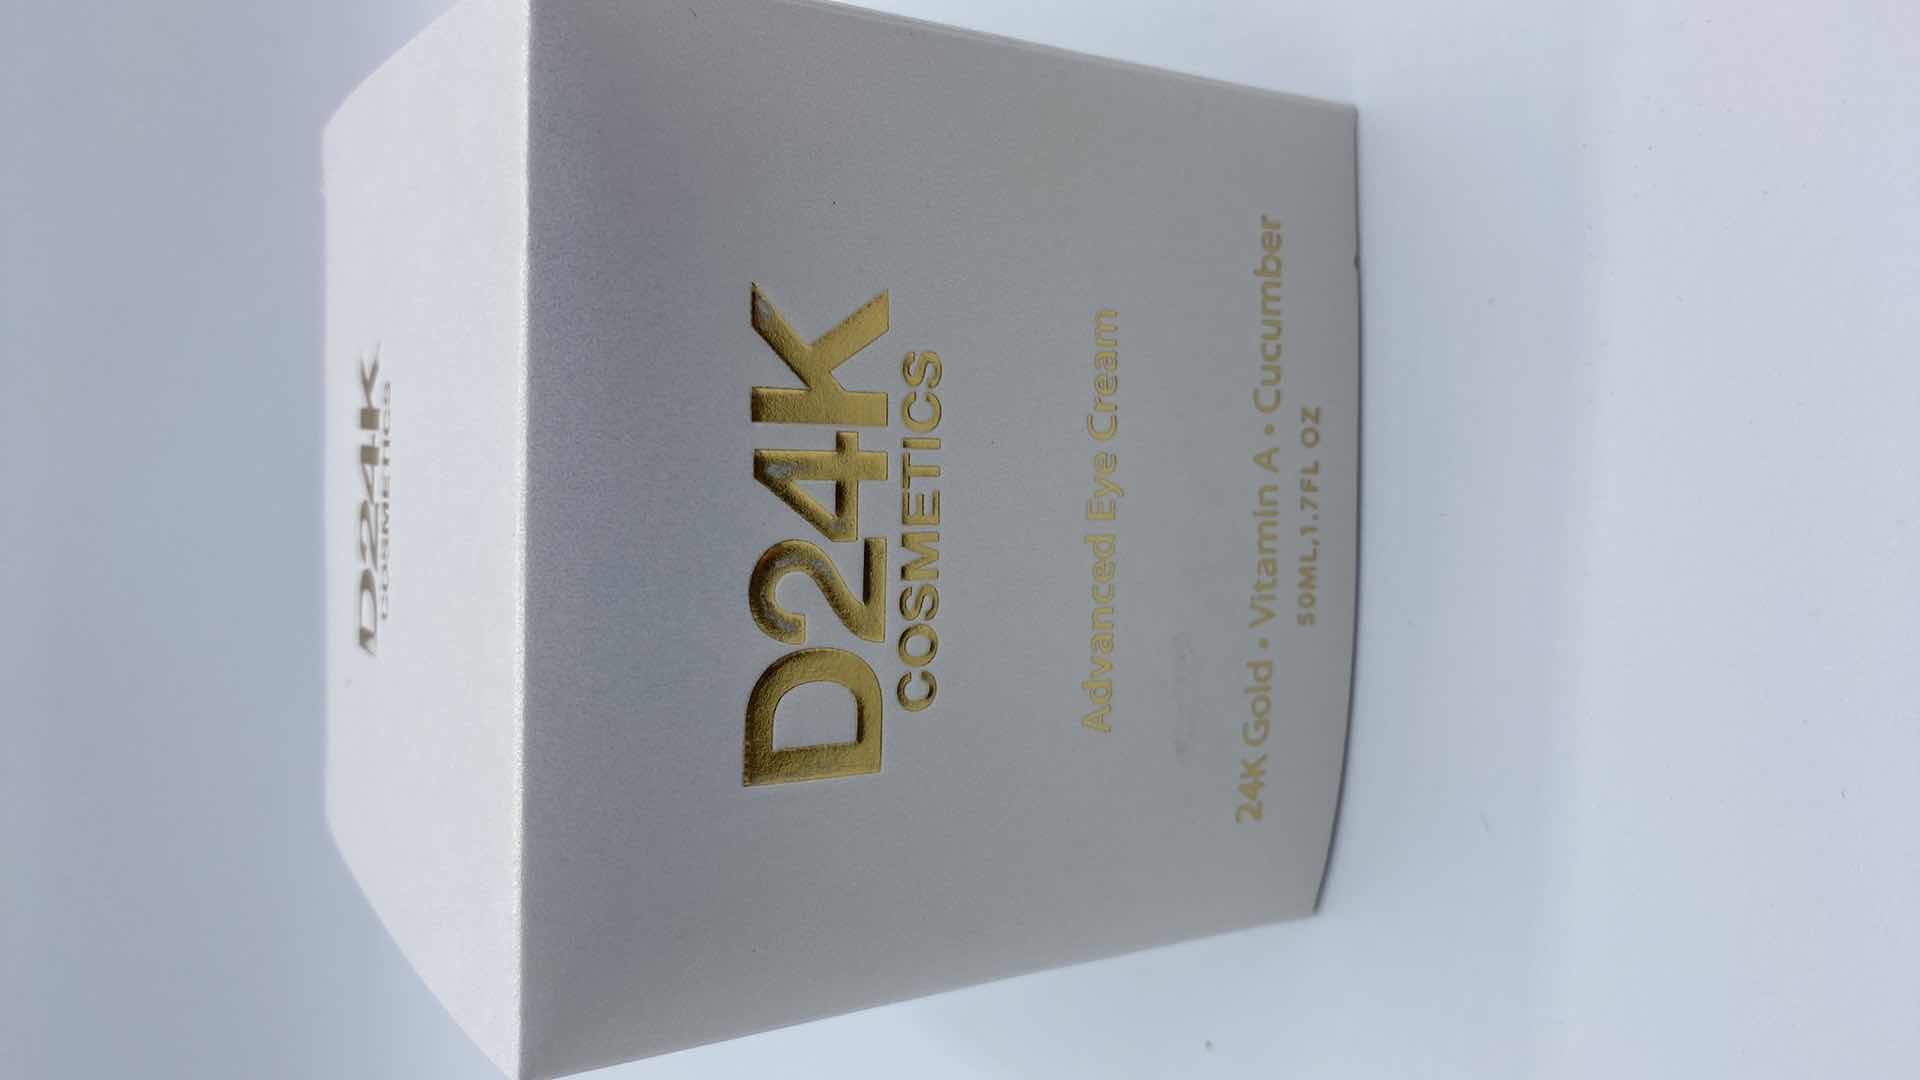 Photo 3 of NEW D24K ADVANCED EYE CREAM - SLOWS DEPLETION OF COLLAGEN AND STIMULATES CELL GROWTH FOR PLUMP LIFTED HYDRATED SKIN